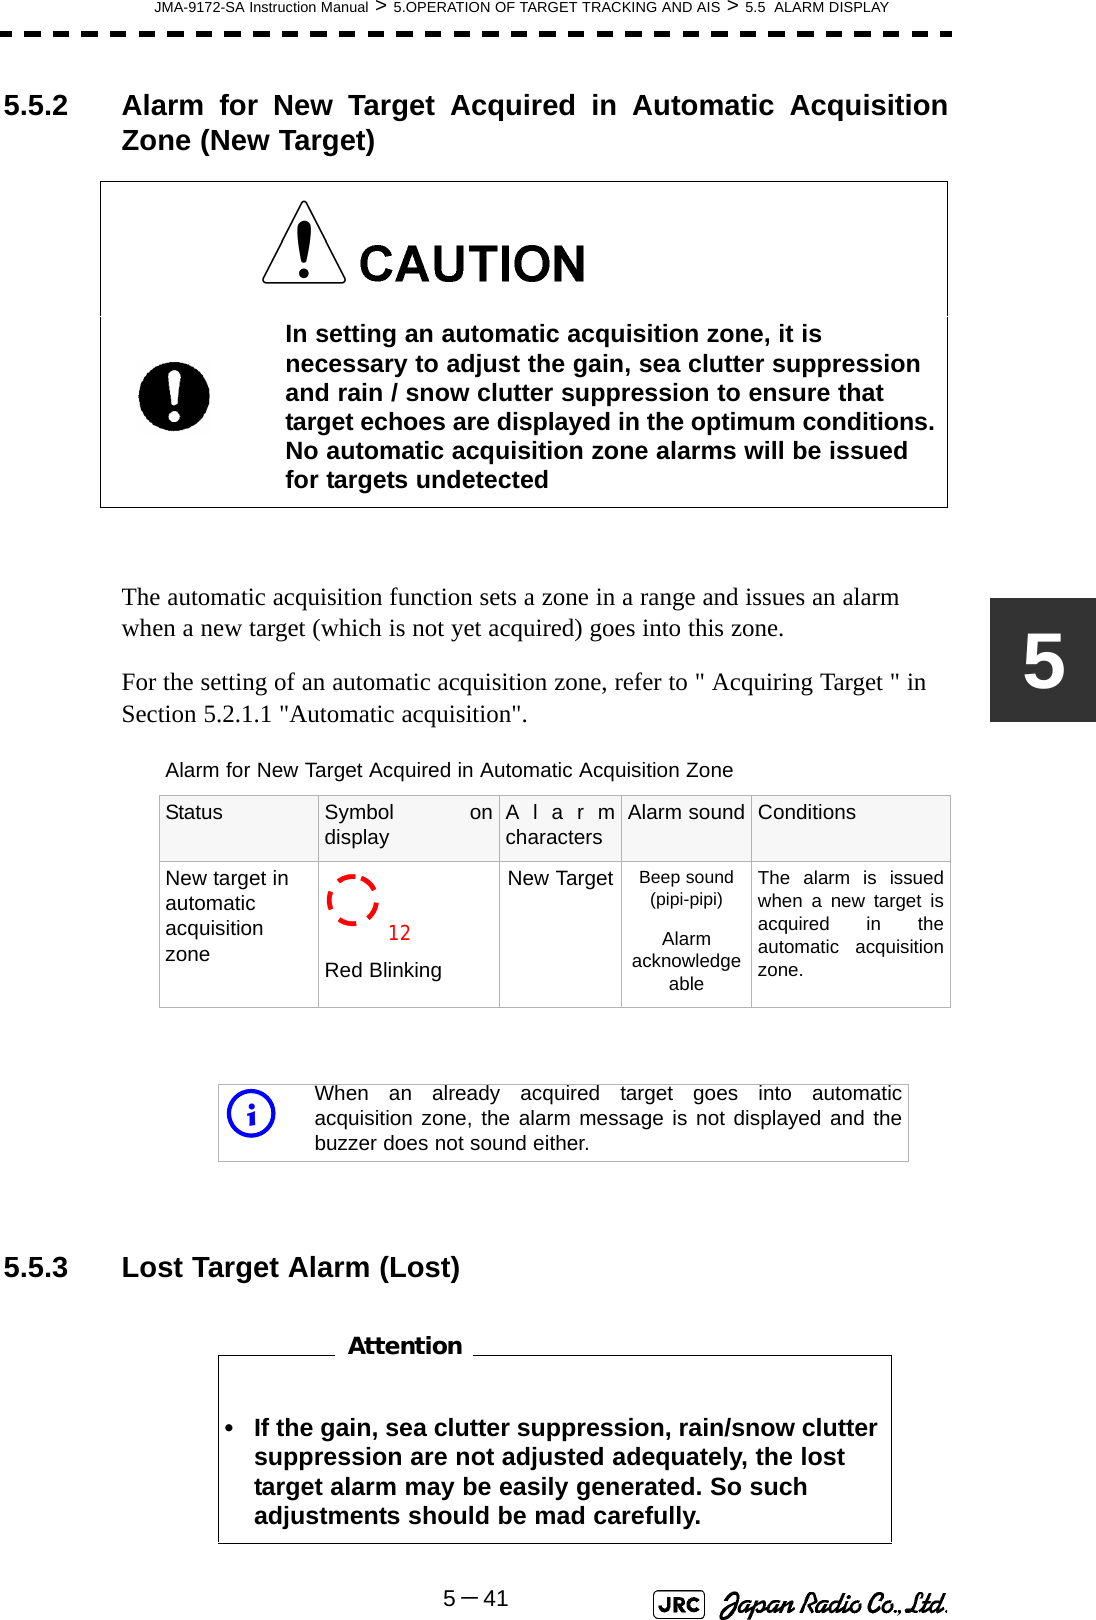 JMA-9172-SA Instruction Manual &gt; 5.OPERATION OF TARGET TRACKING AND AIS &gt; 5.5  ALARM DISPLAY5－4155.5.2 Alarm for New Target Acquired in Automatic AcquisitionZone (New Target)The automatic acquisition function sets a zone in a range and issues an alarm when a new target (which is not yet acquired) goes into this zone.For the setting of an automatic acquisition zone, refer to &quot; Acquiring Target &quot; in Section 5.2.1.1 &quot;Automatic acquisition&quot;. 5.5.3 Lost Target Alarm (Lost)　　　　　　　　In setting an automatic acquisition zone, it is necessary to adjust the gain, sea clutter suppression and rain / snow clutter suppression to ensure that target echoes are displayed in the optimum conditions. No automatic acquisition zone alarms will be issued for targets undetectedAlarm for New Target Acquired in Automatic Acquisition ZoneStatus Symbol ondisplay Alarmcharacters Alarm sound ConditionsNew target in automatic acquisition zone Red BlinkingNew Target Beep sound (pipi-pipi)Alarm acknowledgeableThe alarm is issuedwhen a new target isacquired in theautomatic acquisitionzone.iWhen an already acquired target goes into automaticacquisition zone, the alarm message is not displayed and thebuzzer does not sound either.• If the gain, sea clutter suppression, rain/snow clutter suppression are not adjusted adequately, the lost target alarm may be easily generated. So such adjustments should be mad carefully.12Attention